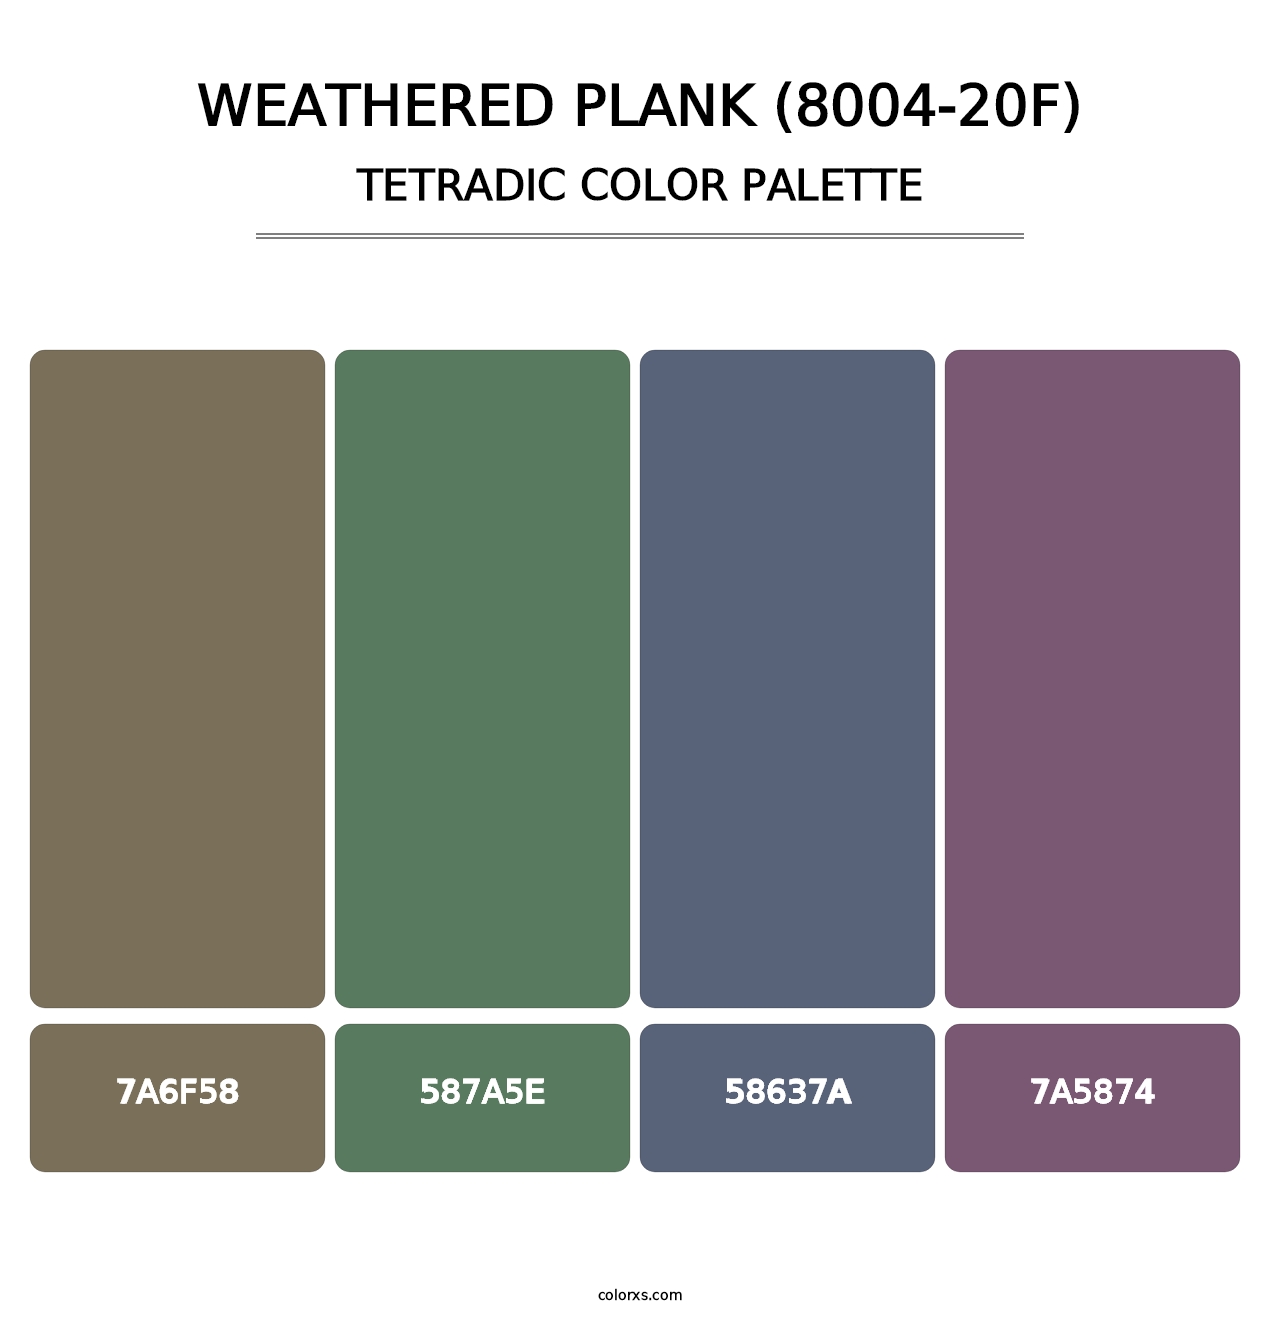 Weathered Plank (8004-20F) - Tetradic Color Palette